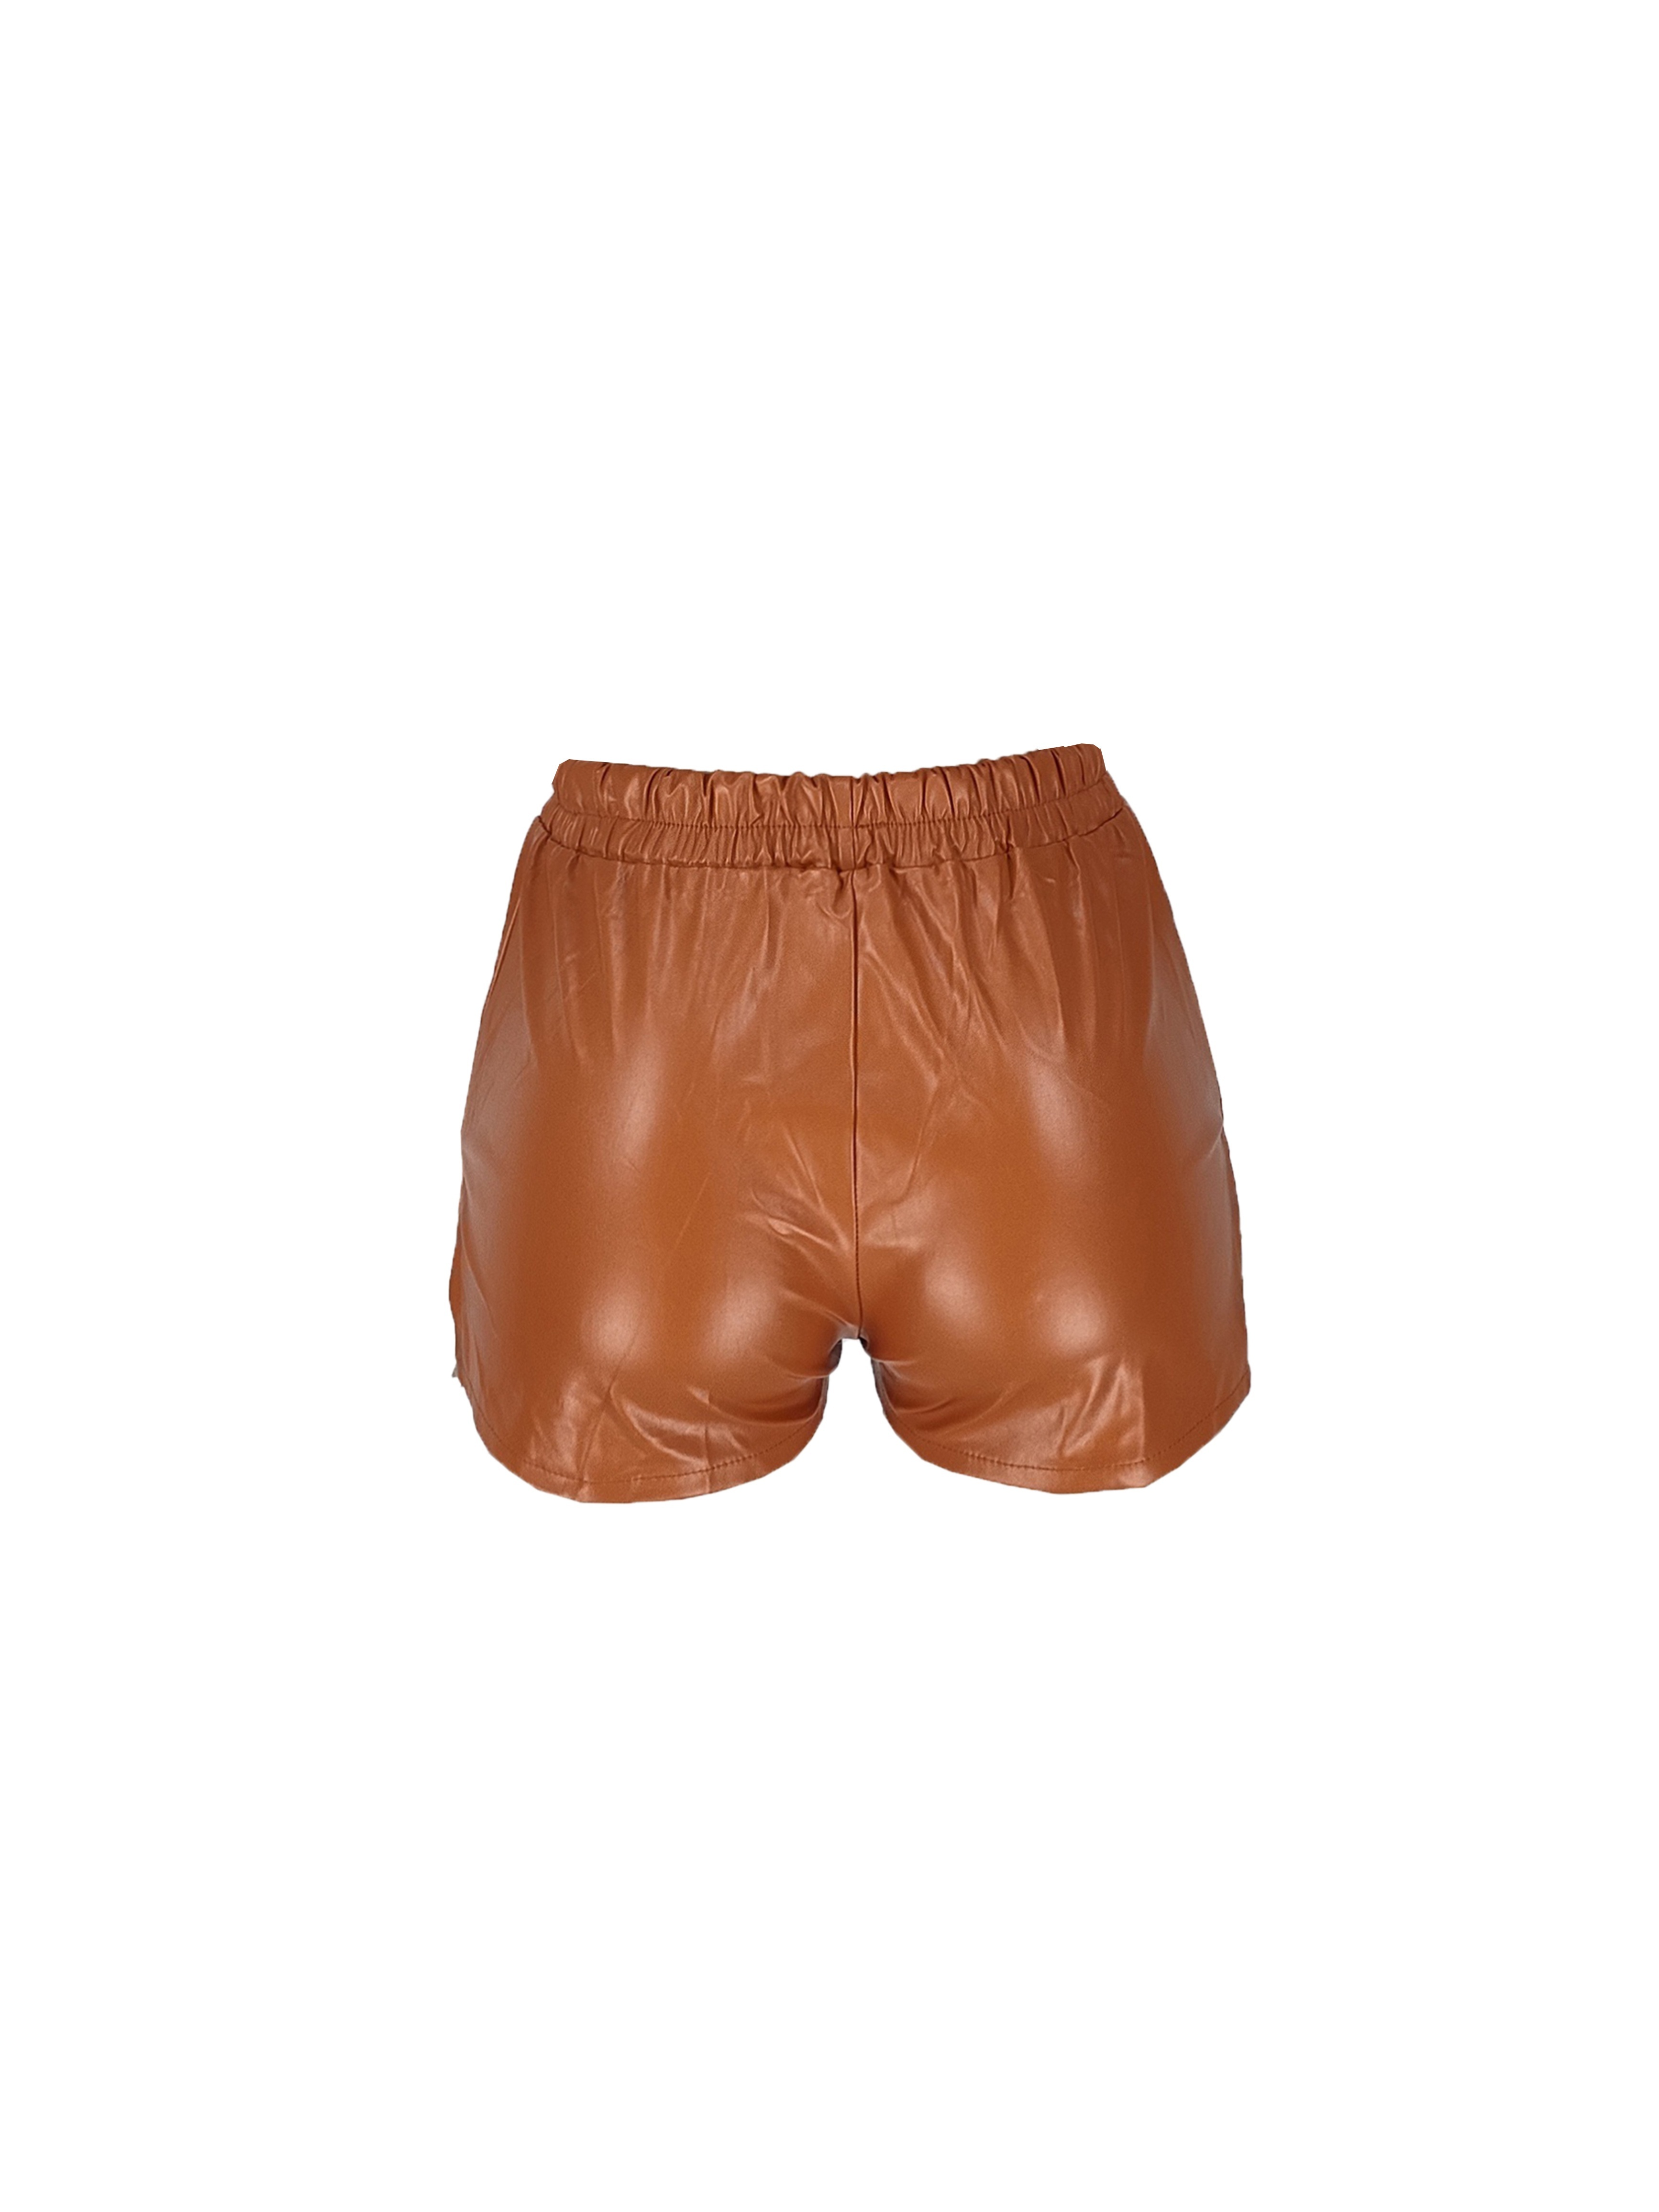 Caramelo Faux Leather Shorts | High Waist